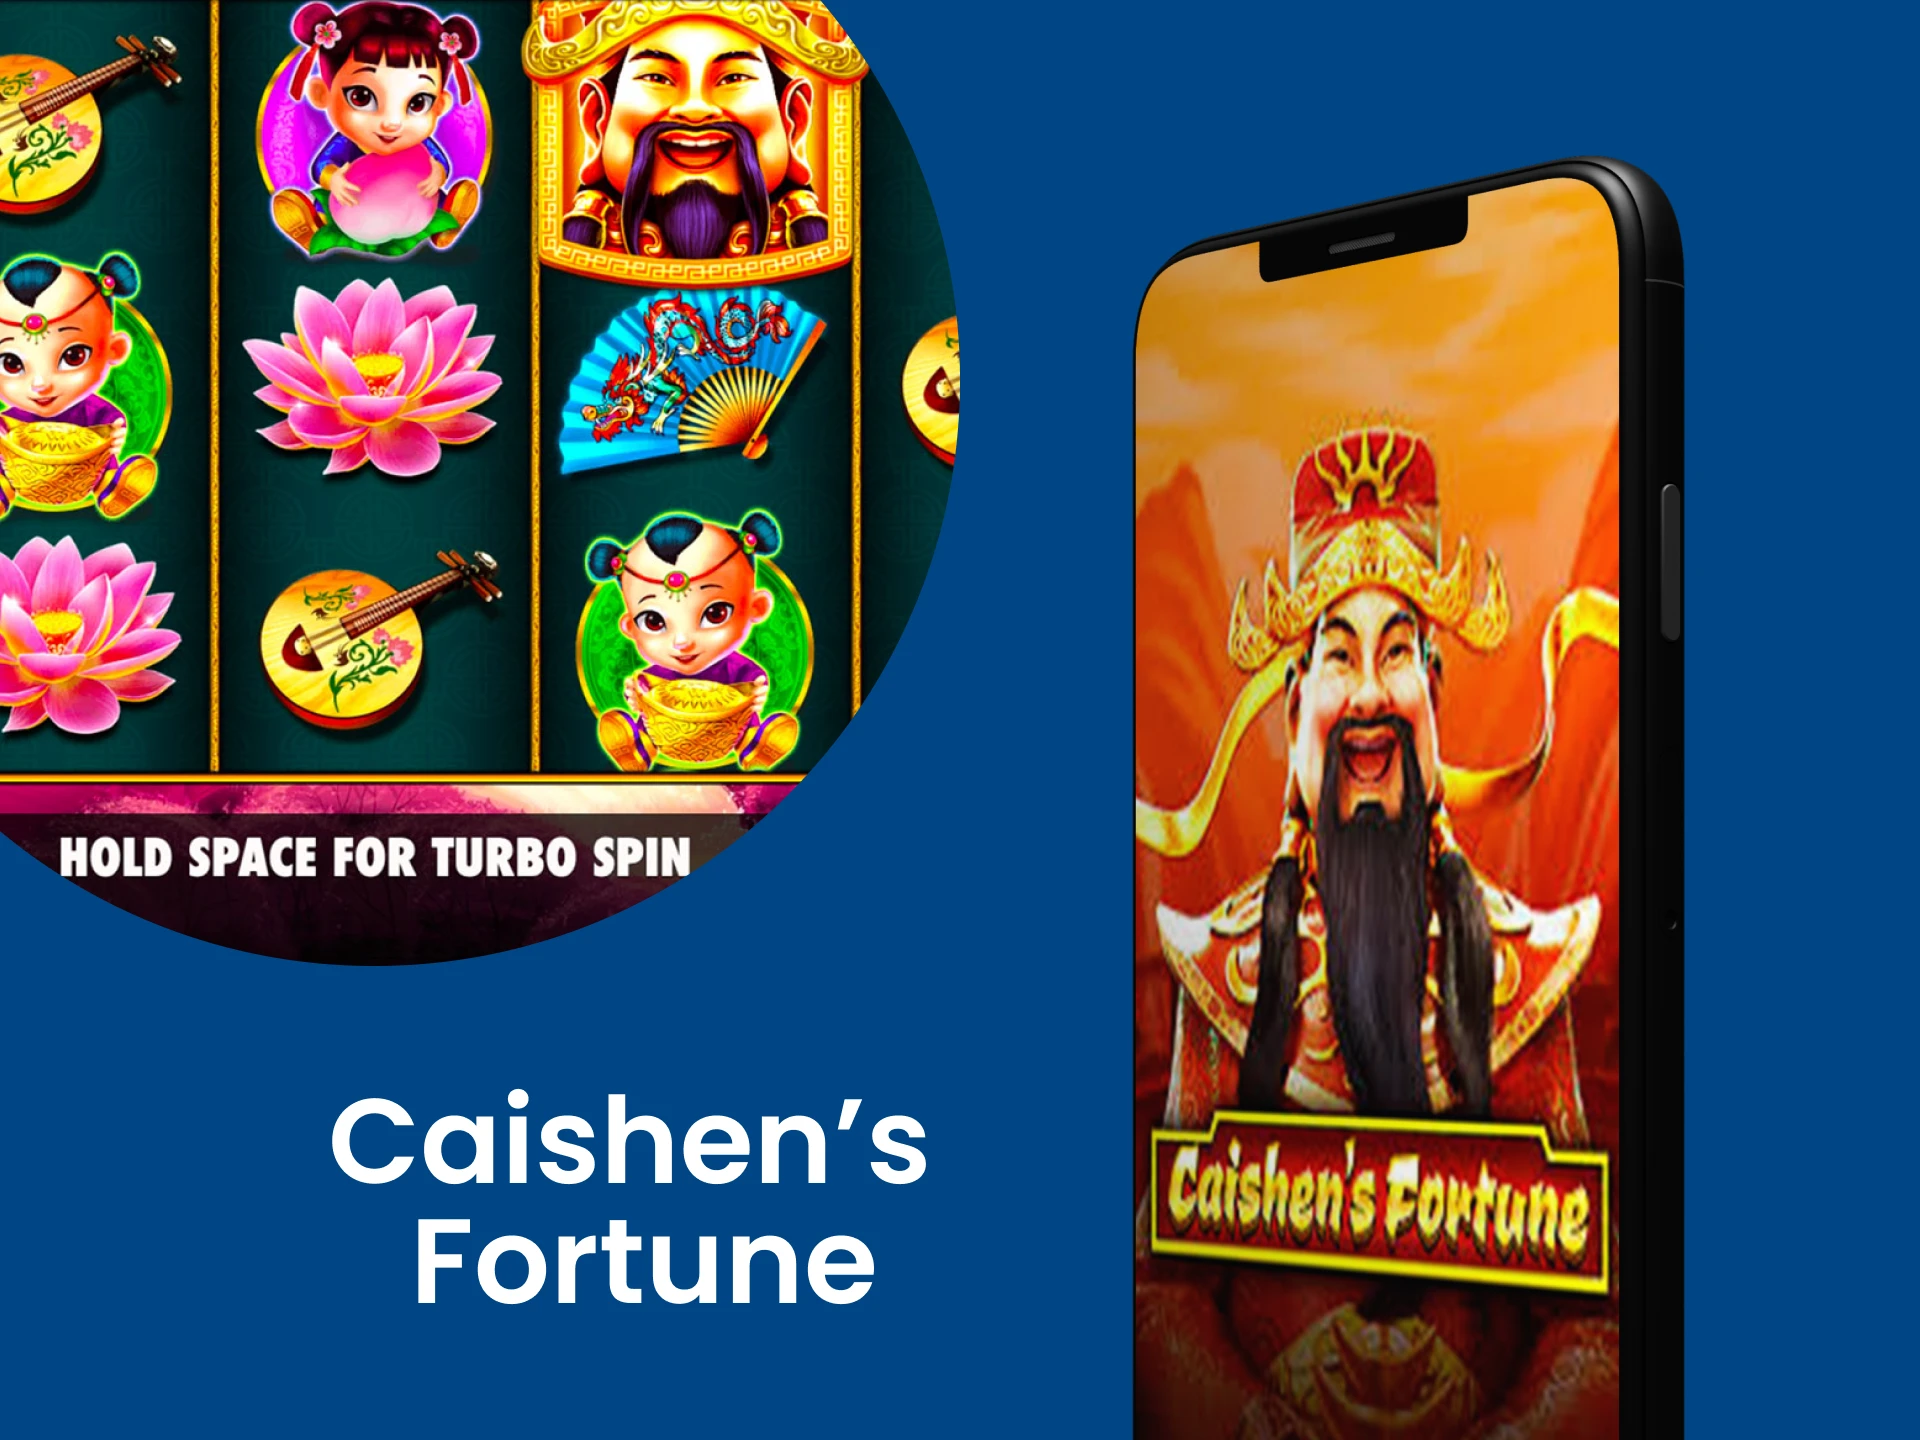 Play Caihens Fortune through the Android application.